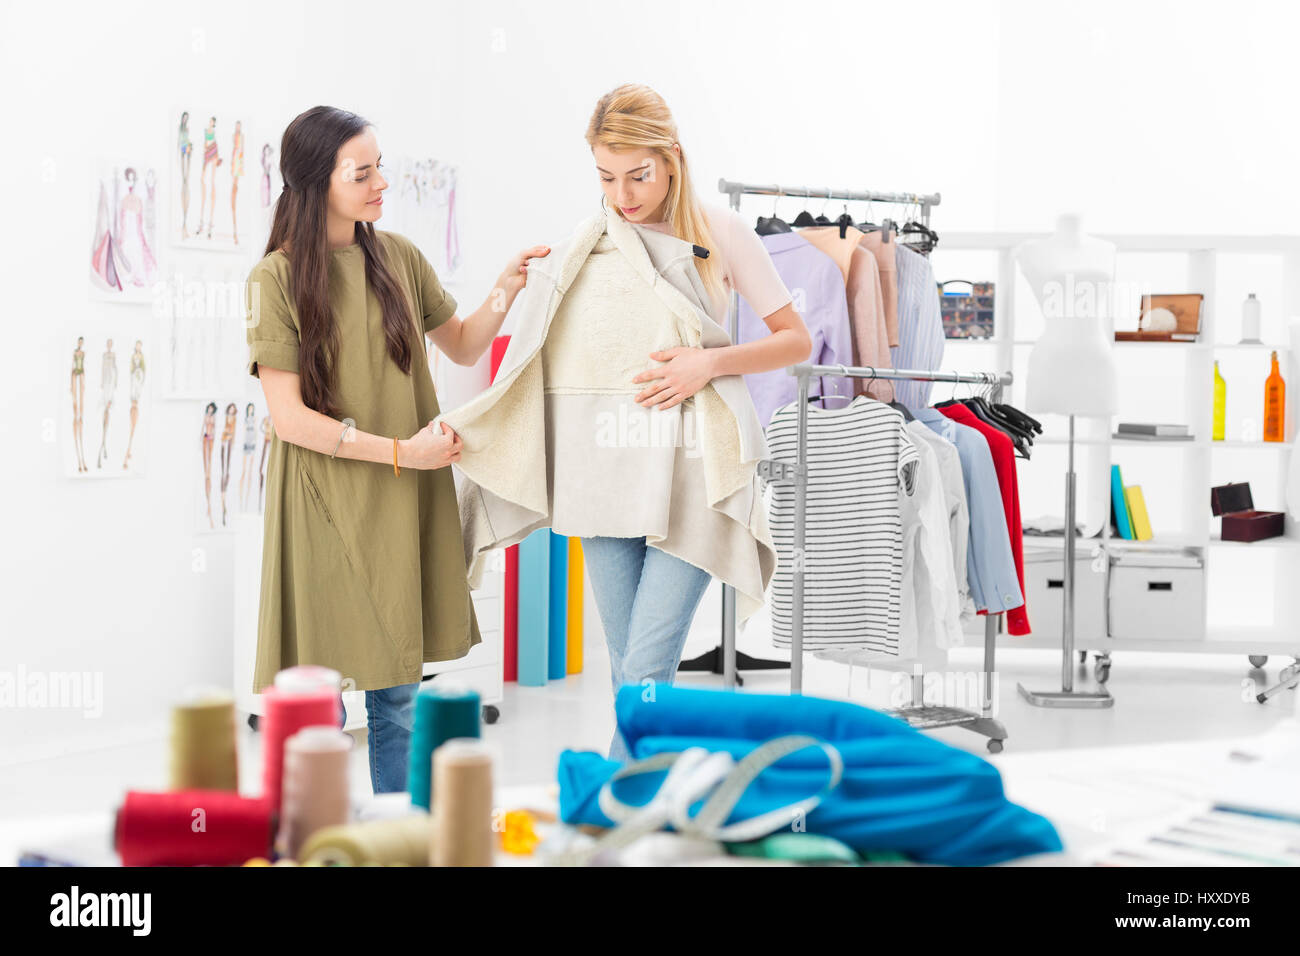 Customer tries new clothing collection of a successful fashion designer in her showroom Stock Photo